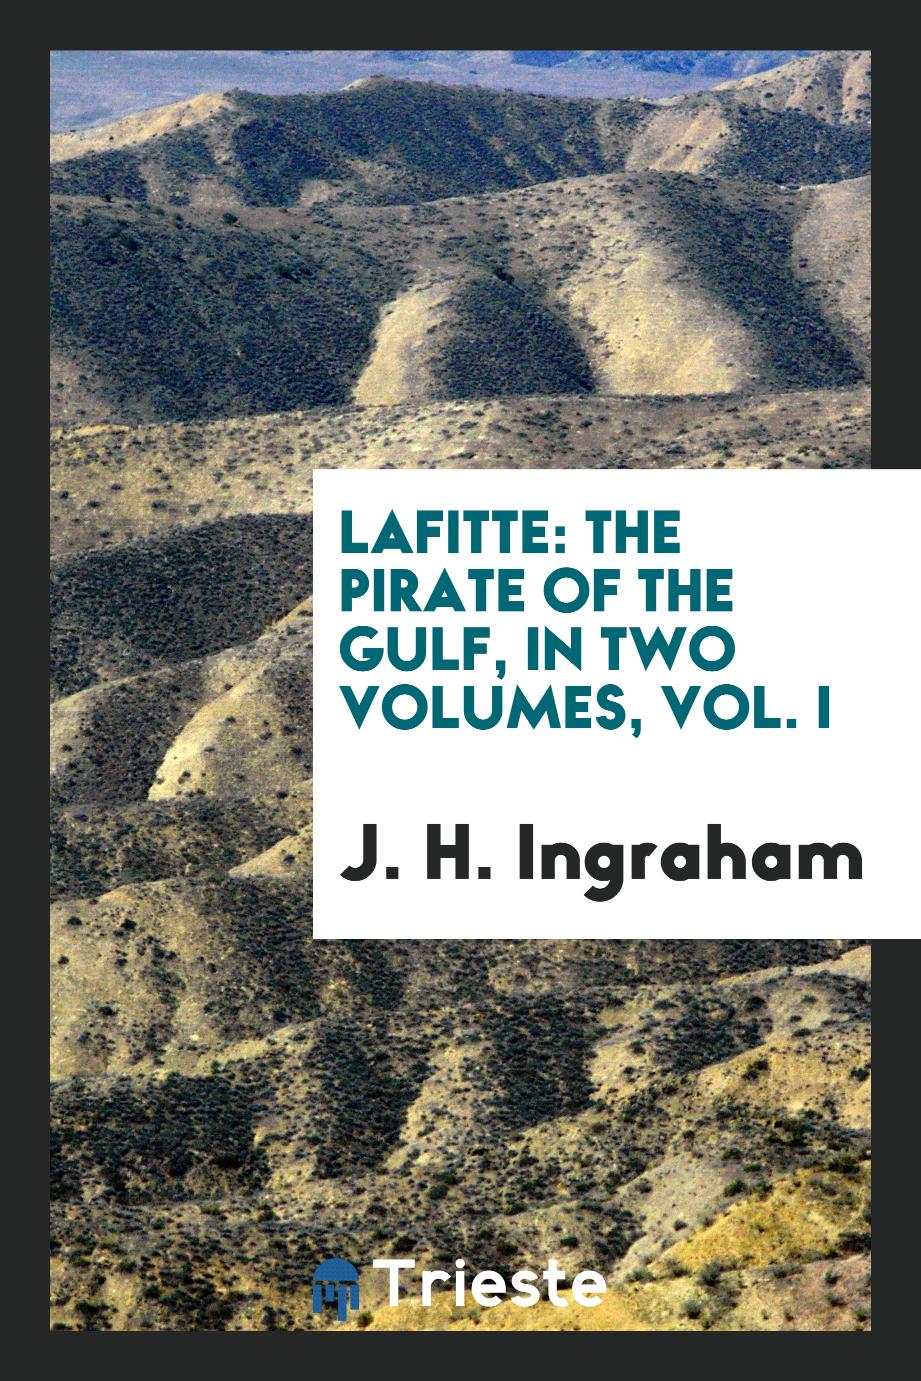 Lafitte: the pirate of the Gulf, in two volumes, Vol. I